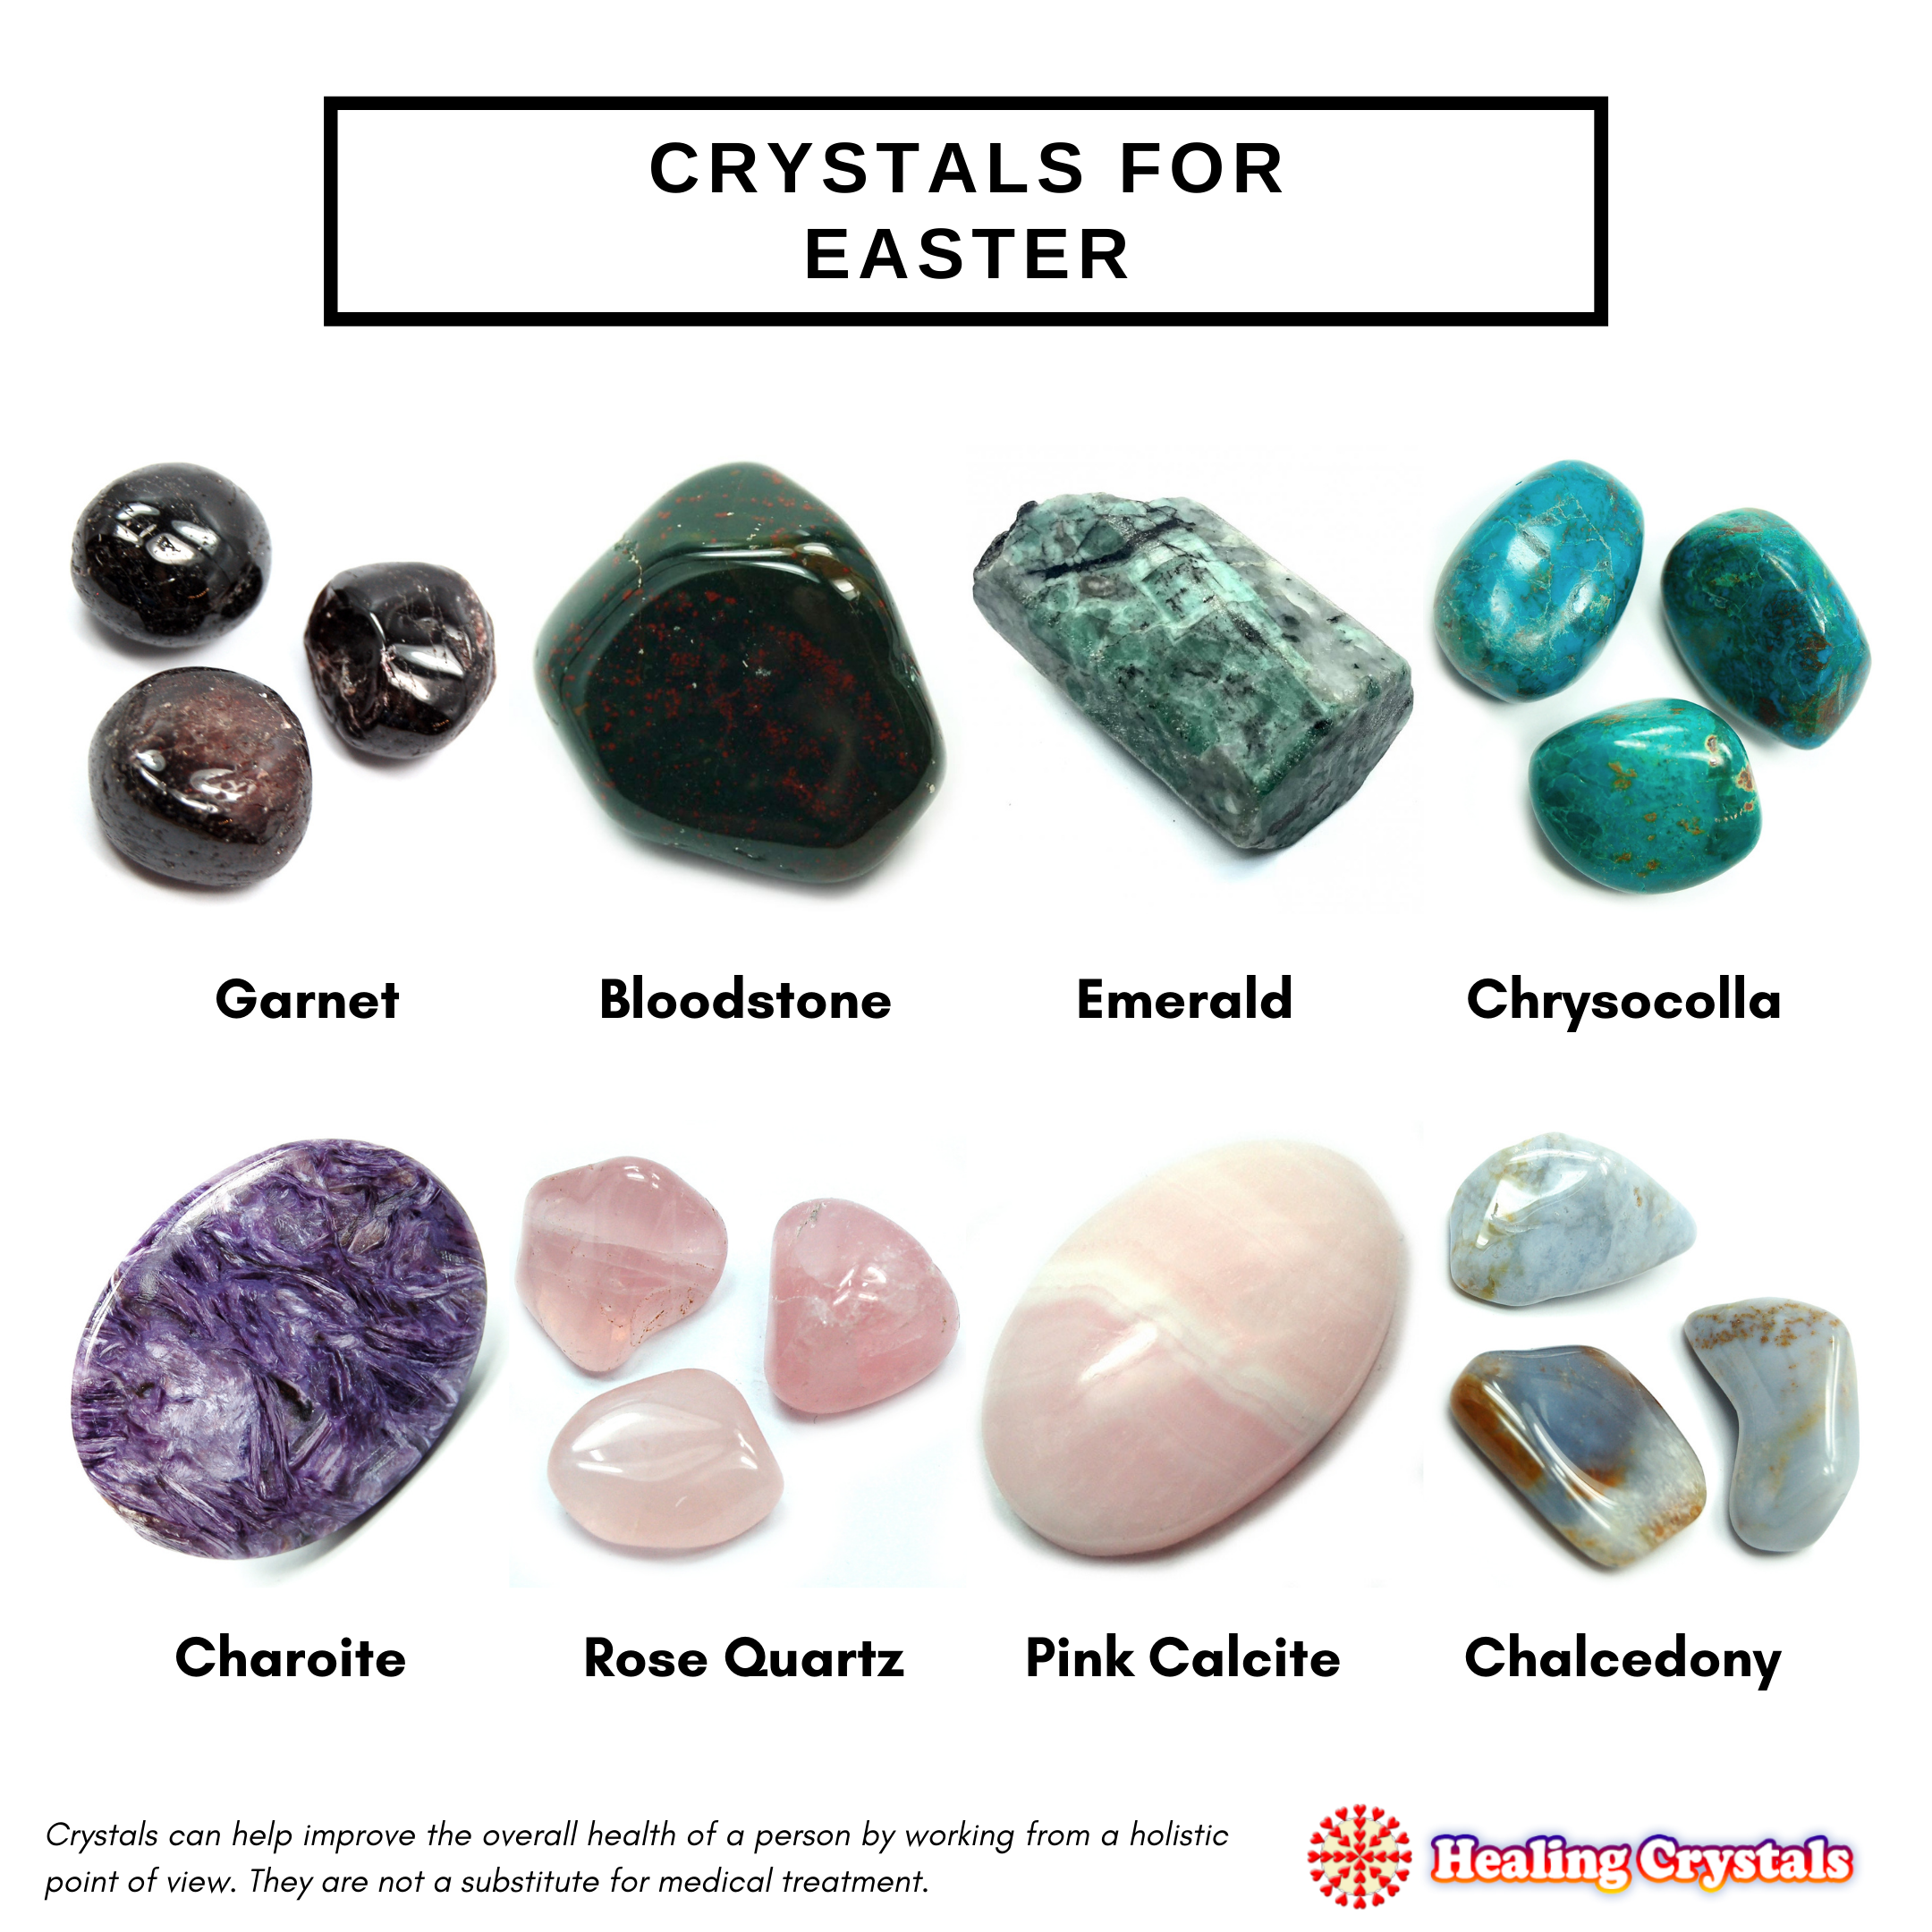 Crystals for Easter